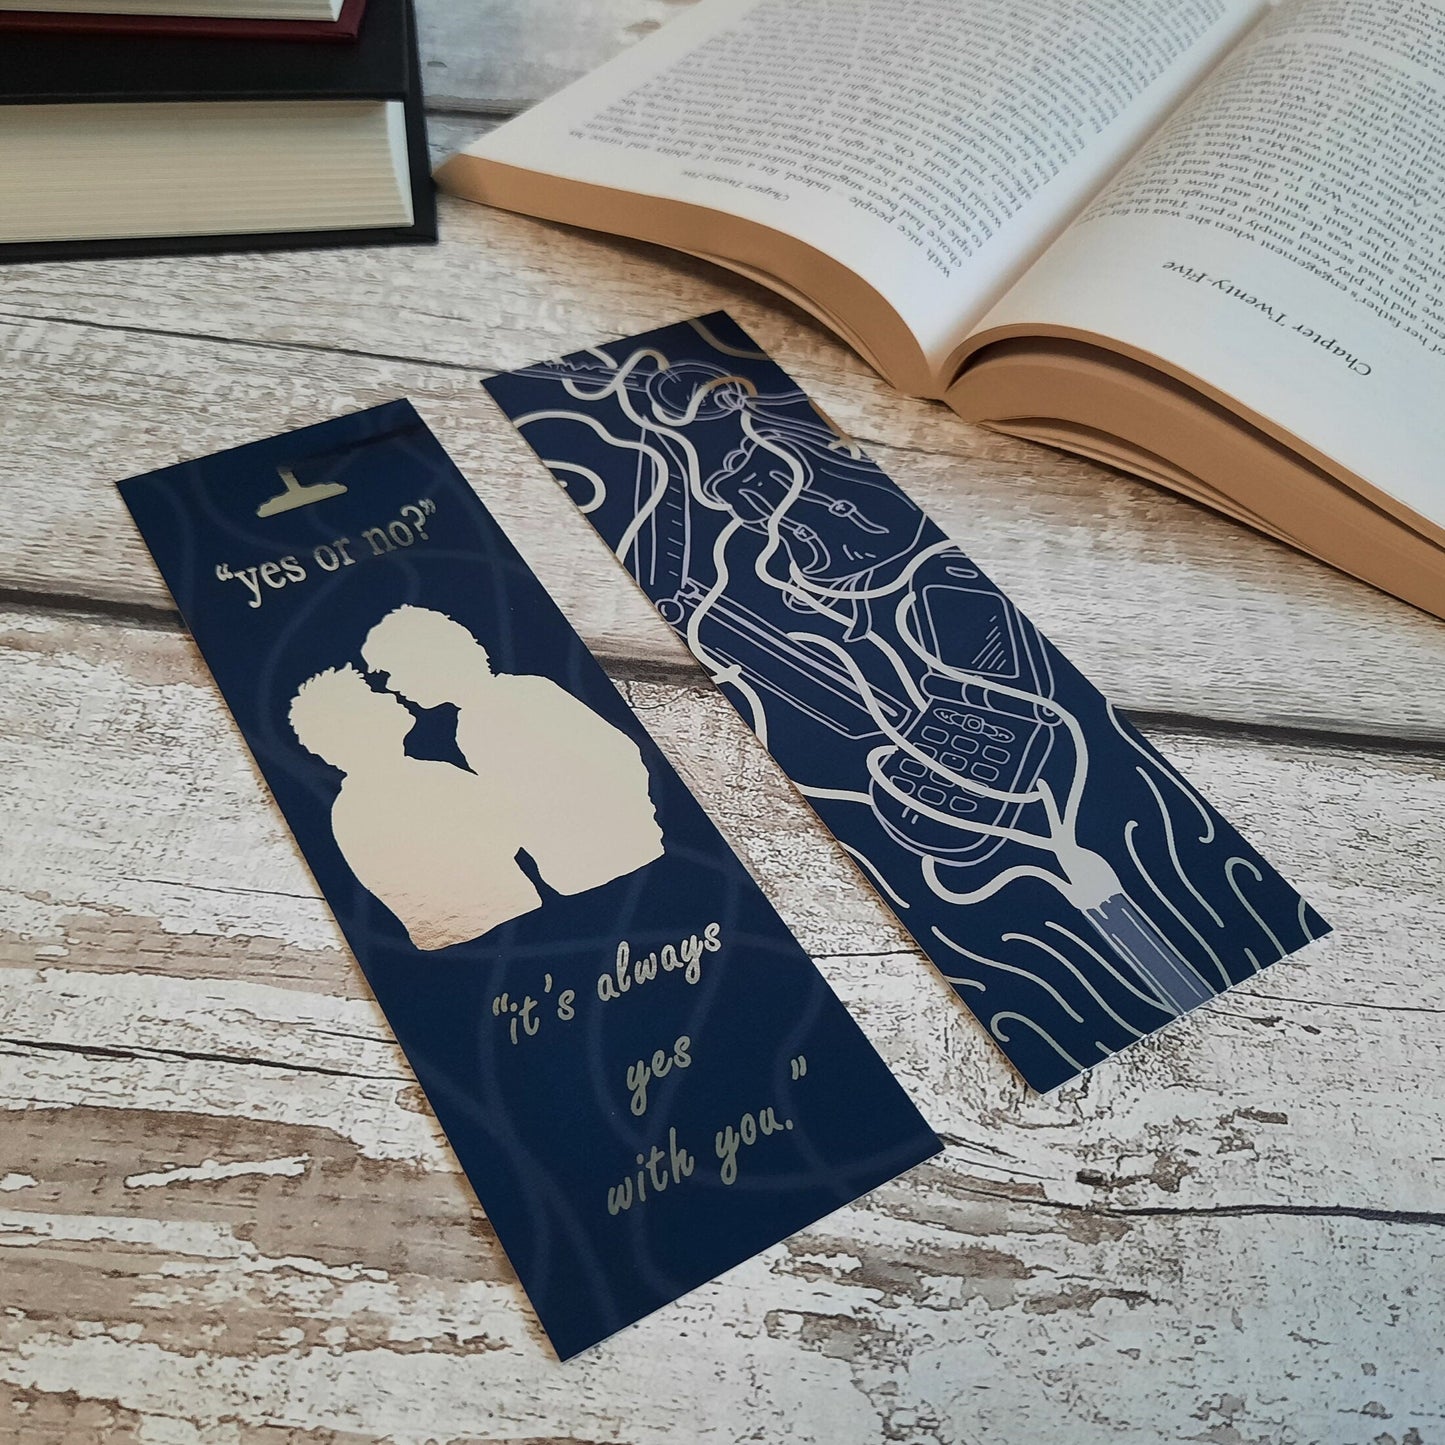 Yes or No? - Silver foiled bookmark - All For the Game/The Foxhole Court by Nora Sakavik